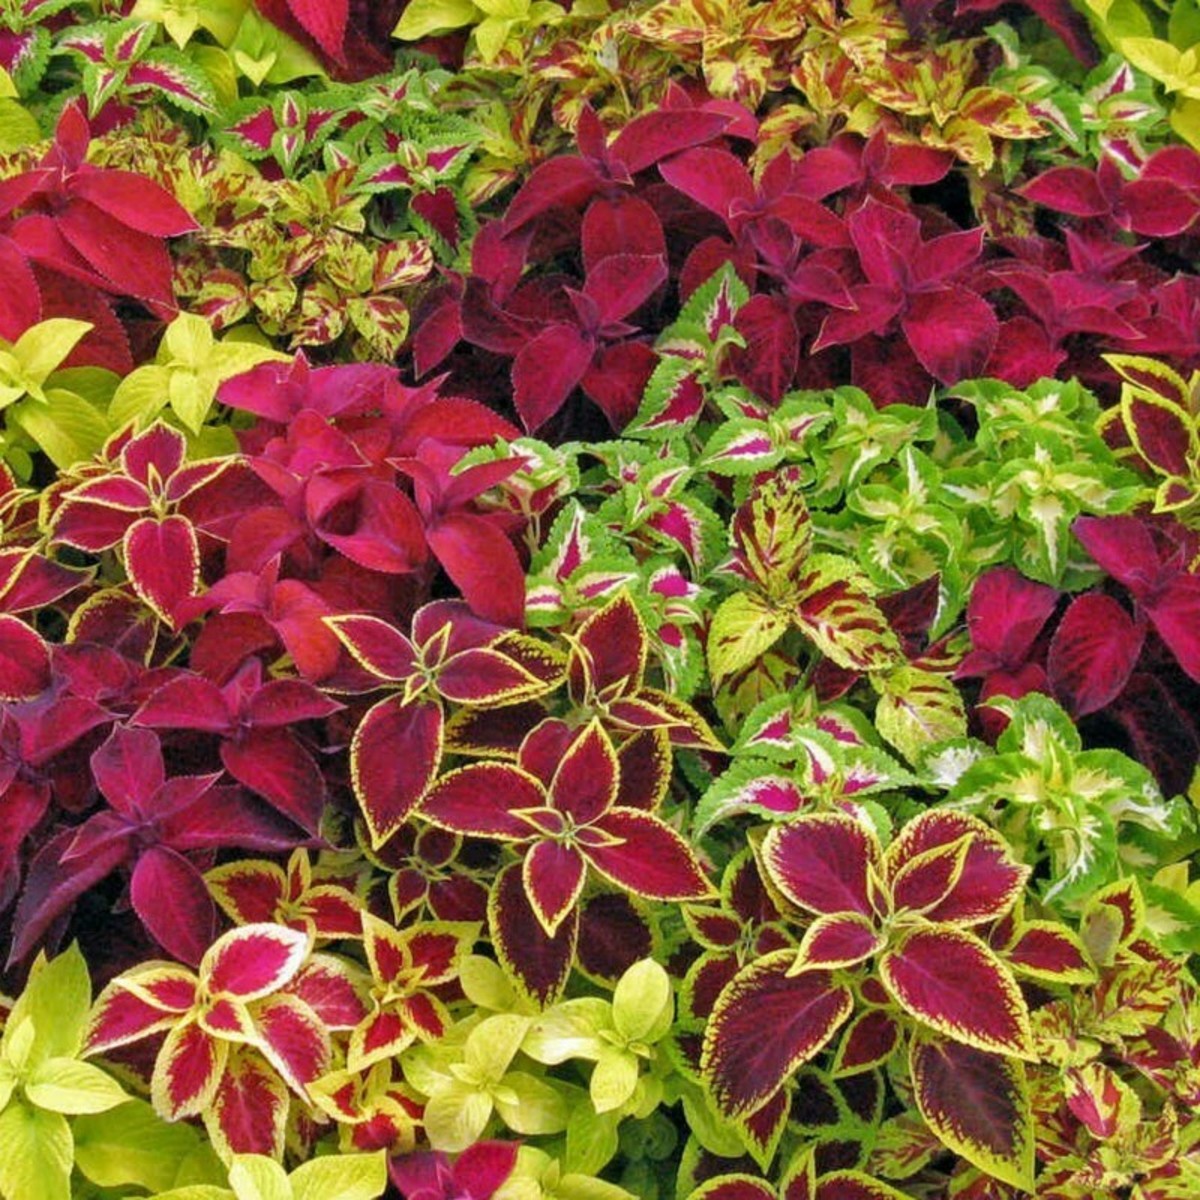 The only problem I've ever had with coleus is trying to decide which ones to buy.  There is a seemingly endless selection that can create contrast and focal points, drawing the eye to certain areas of the landscape.